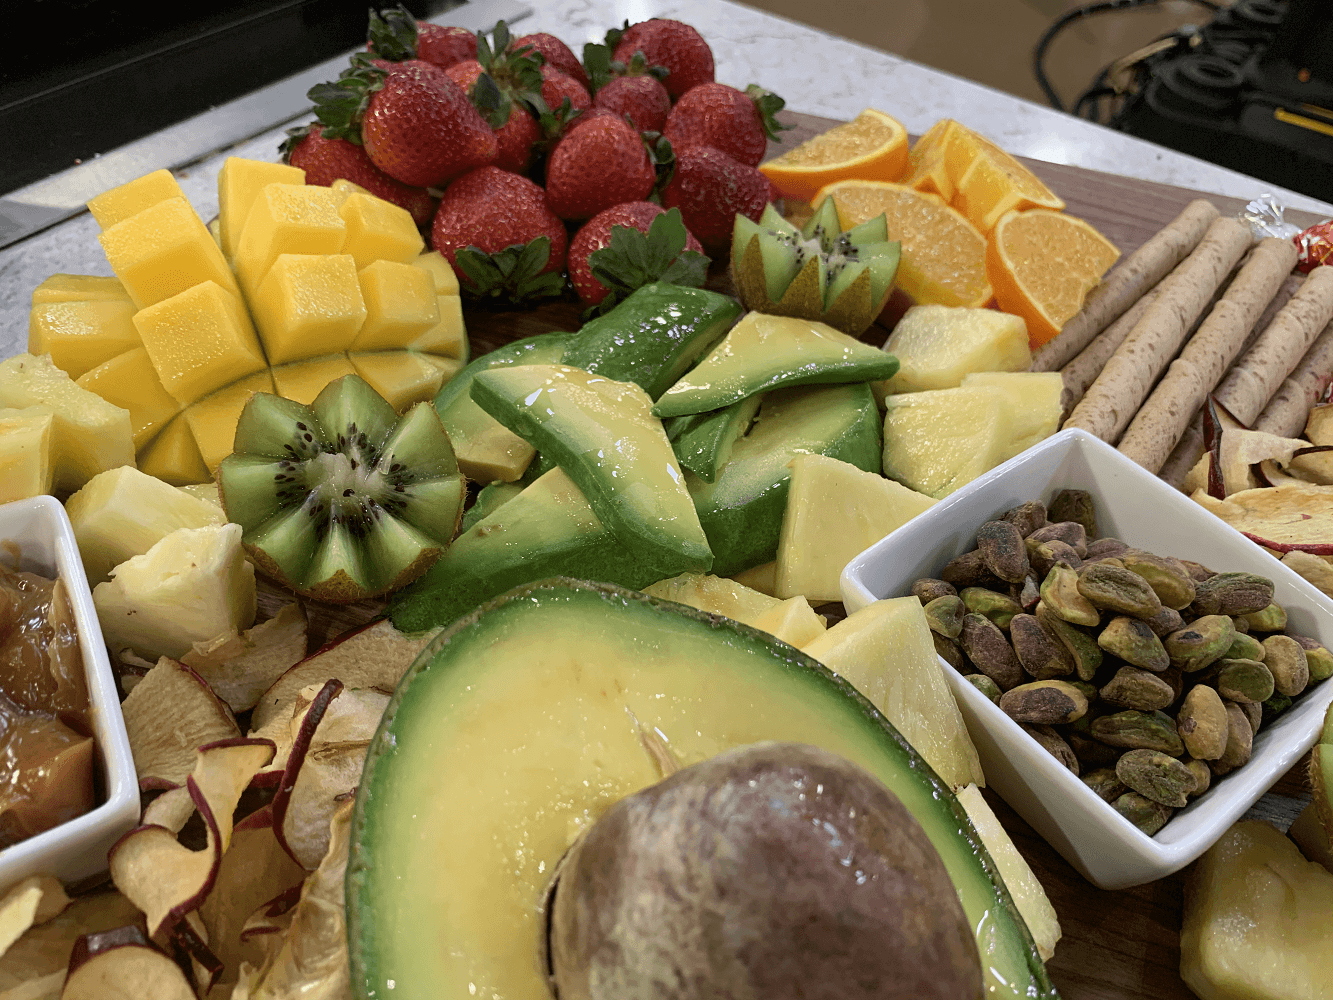 Stawberries, kiwis, avocados, and more! 